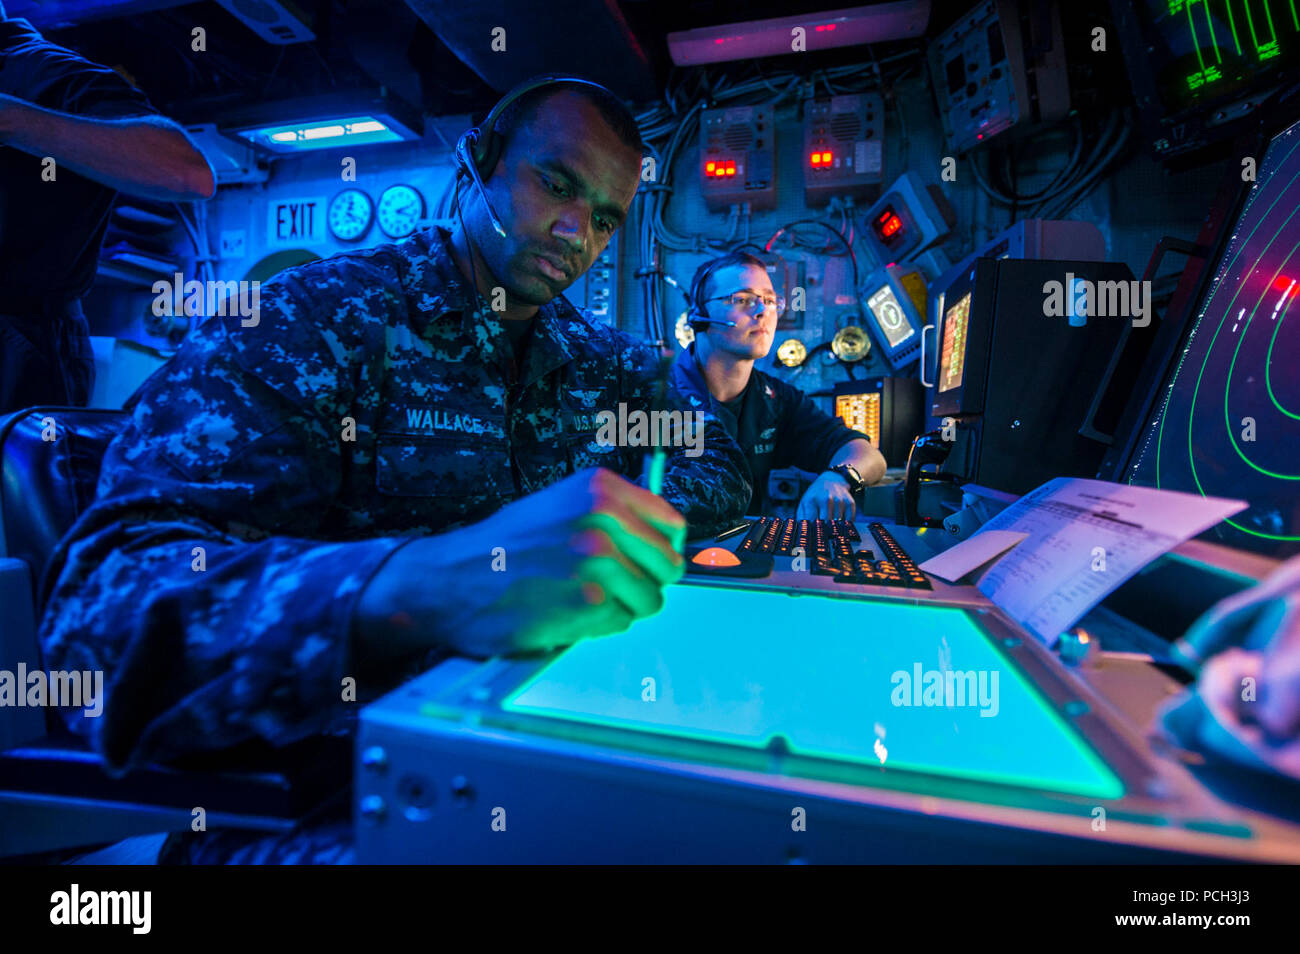 CORAL SEA (July 6, 2013) Air Traffic Controlman 2nd Class Timothy Wallace, left, and Air Traffic Controlman 2nd Class Clayton Alexander, assigned to the amphibious assault ship USS Bonhomme Richard (LHD 6), observe radar signatures in the ship's air traffic control room. Bonhomme Richard is the flagship of the Bonhomme Richard Amphibious Ready Group and, with the embarked 31st Marine Expeditionary Unit (31st MEU) is conducting routing joint-force operations in the U.S. 7th Fleet Area of Responsibility. Stock Photo